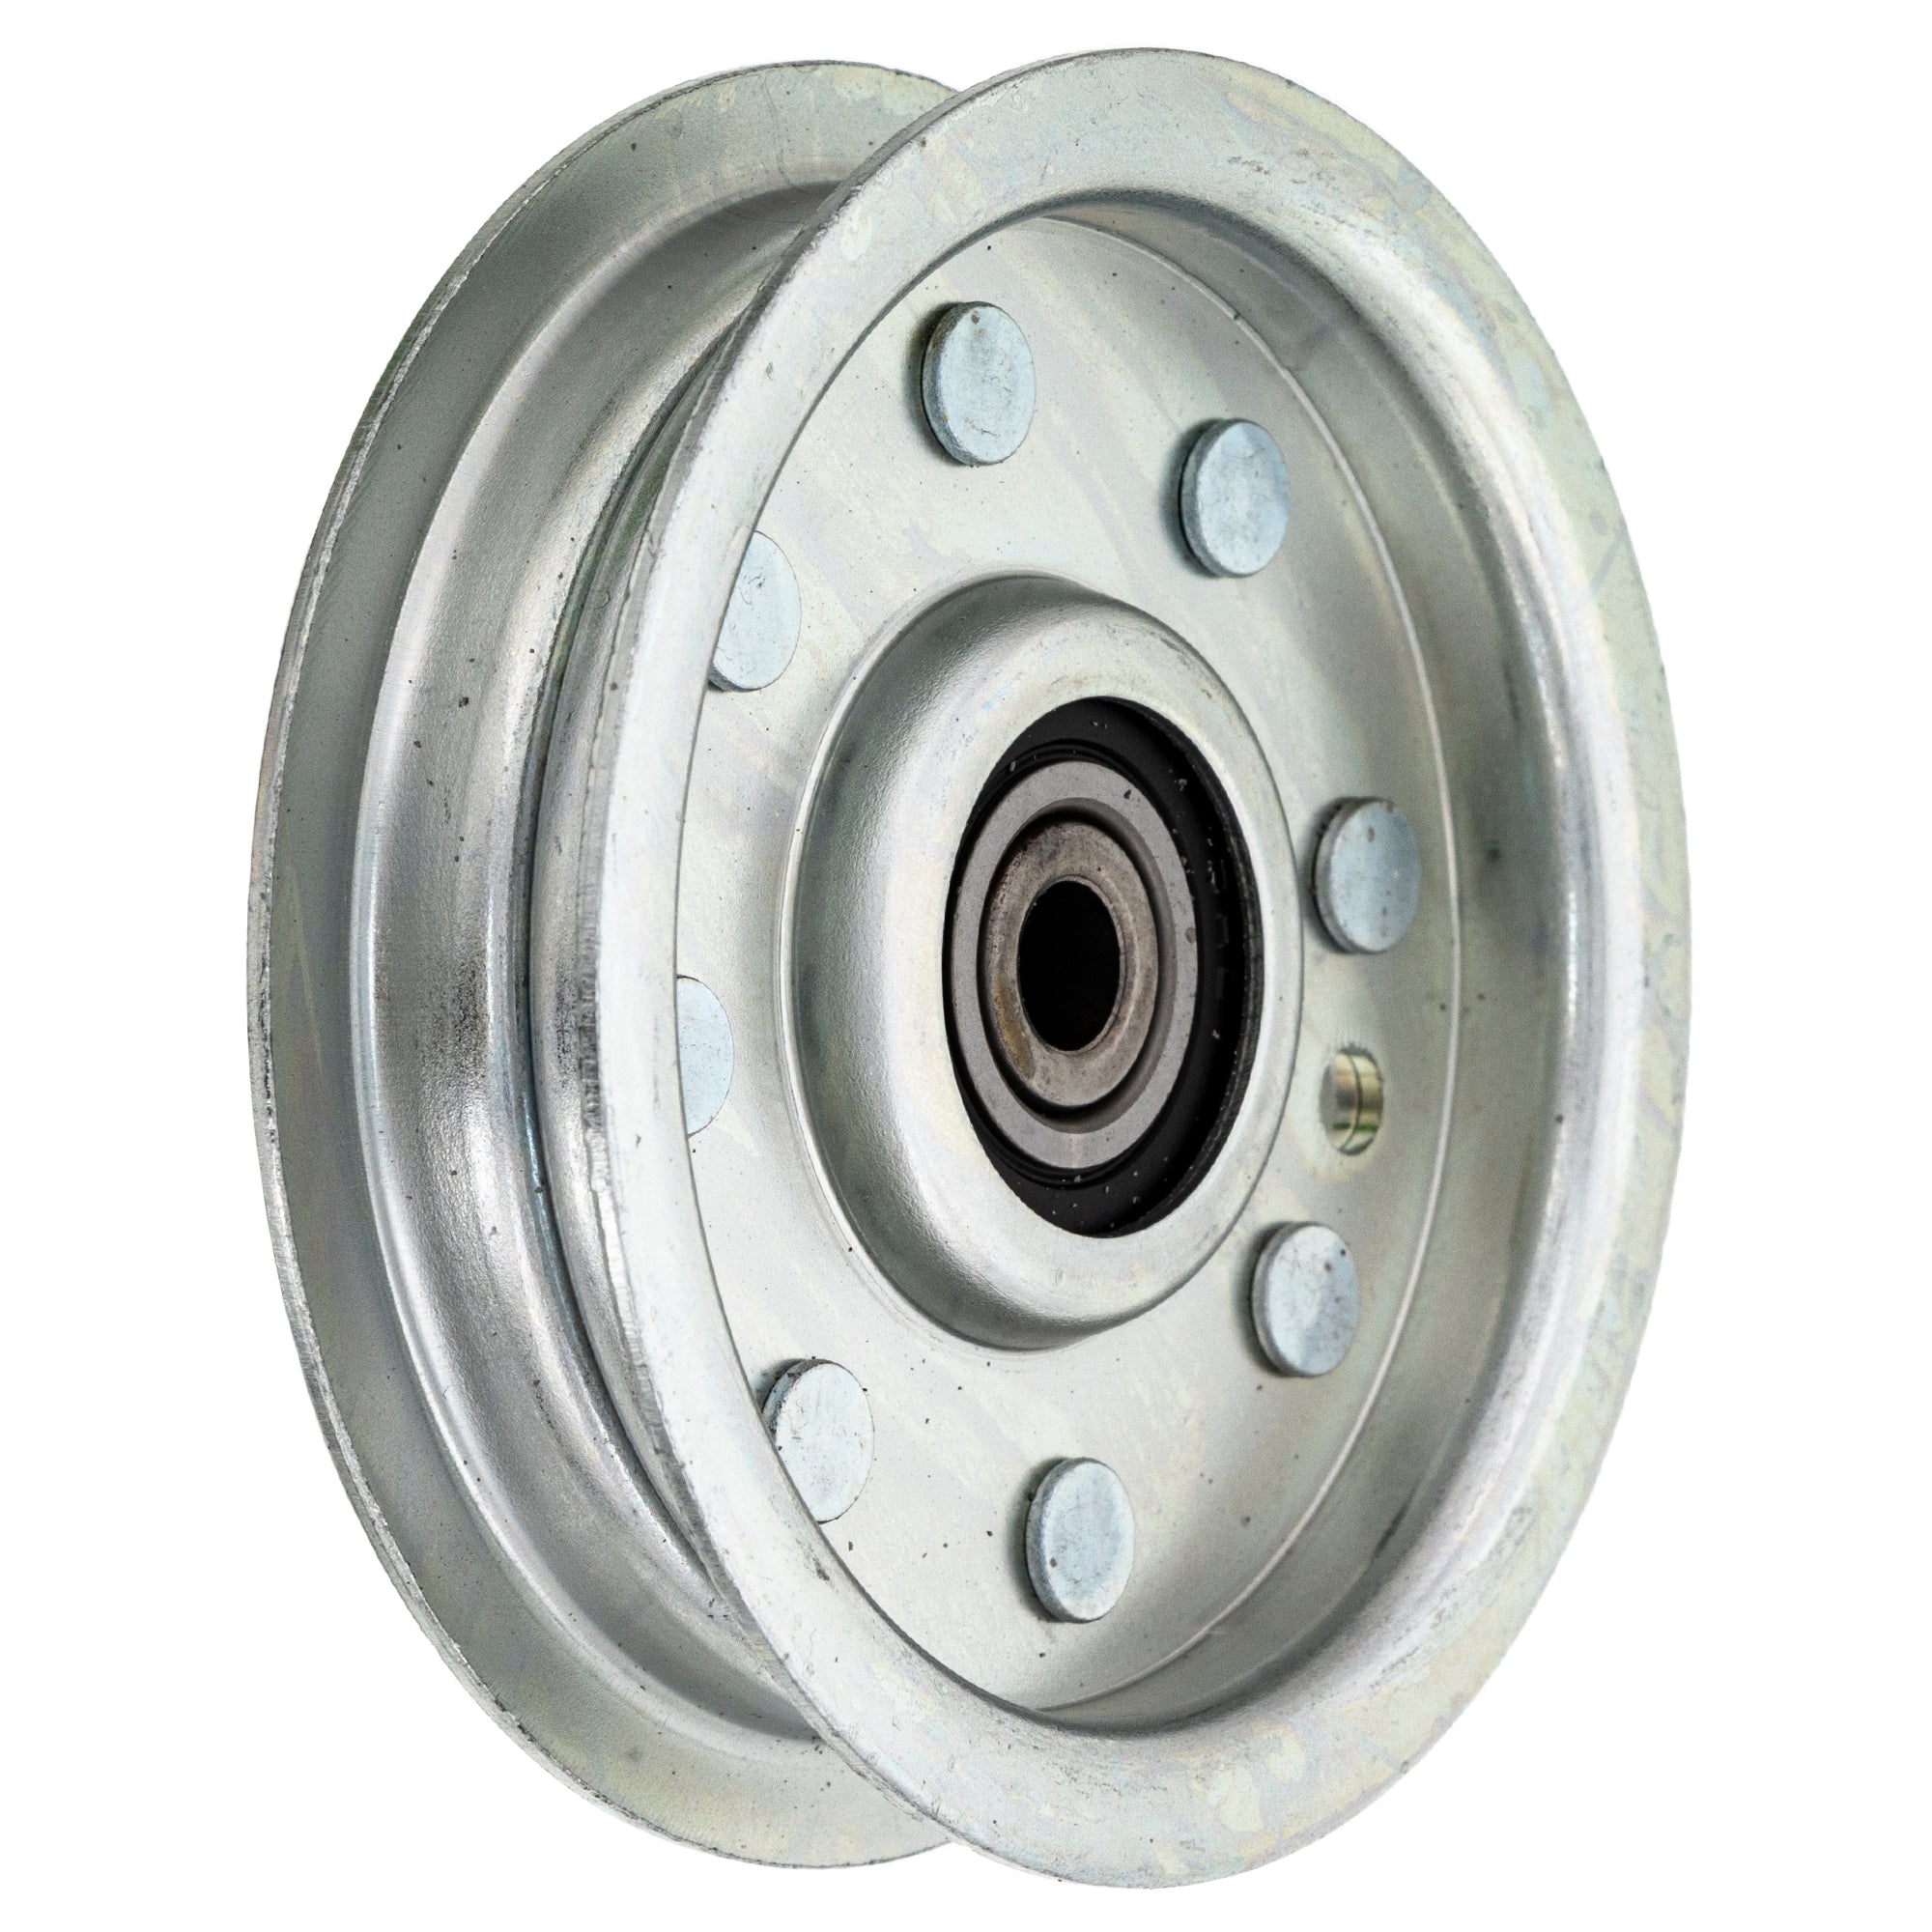 Flat Idler Pulley 810-CID2239L For Cub Cadet Huskee Columbia 756-0627 756-0627D 956-0627 956-0365